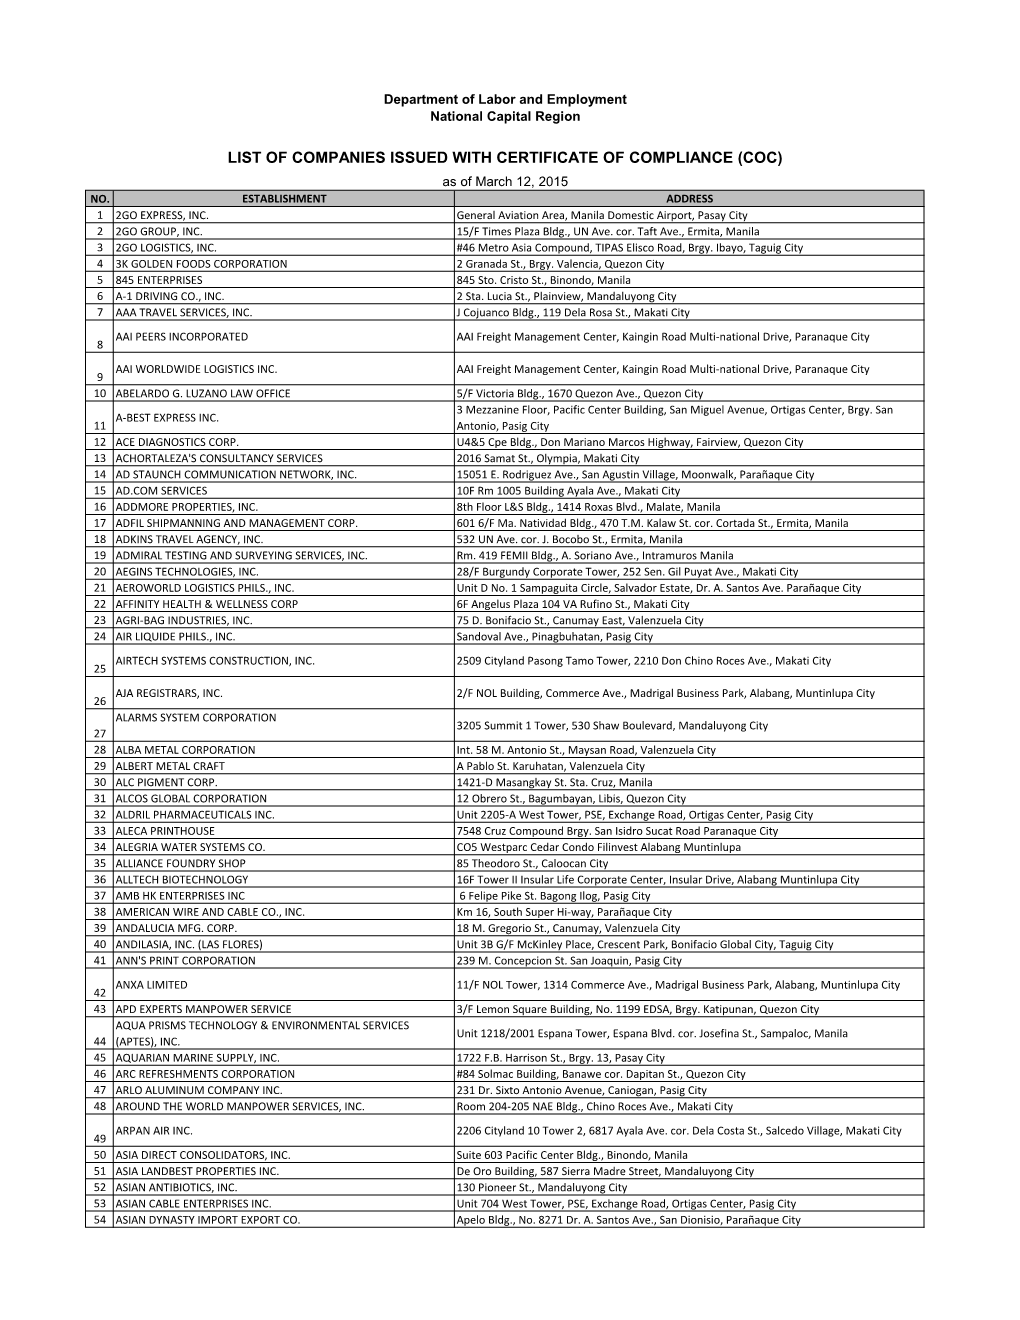 LIST of COMPANIES ISSUED with CERTIFICATE of COMPLIANCE (COC) As of March 12, 2015 NO